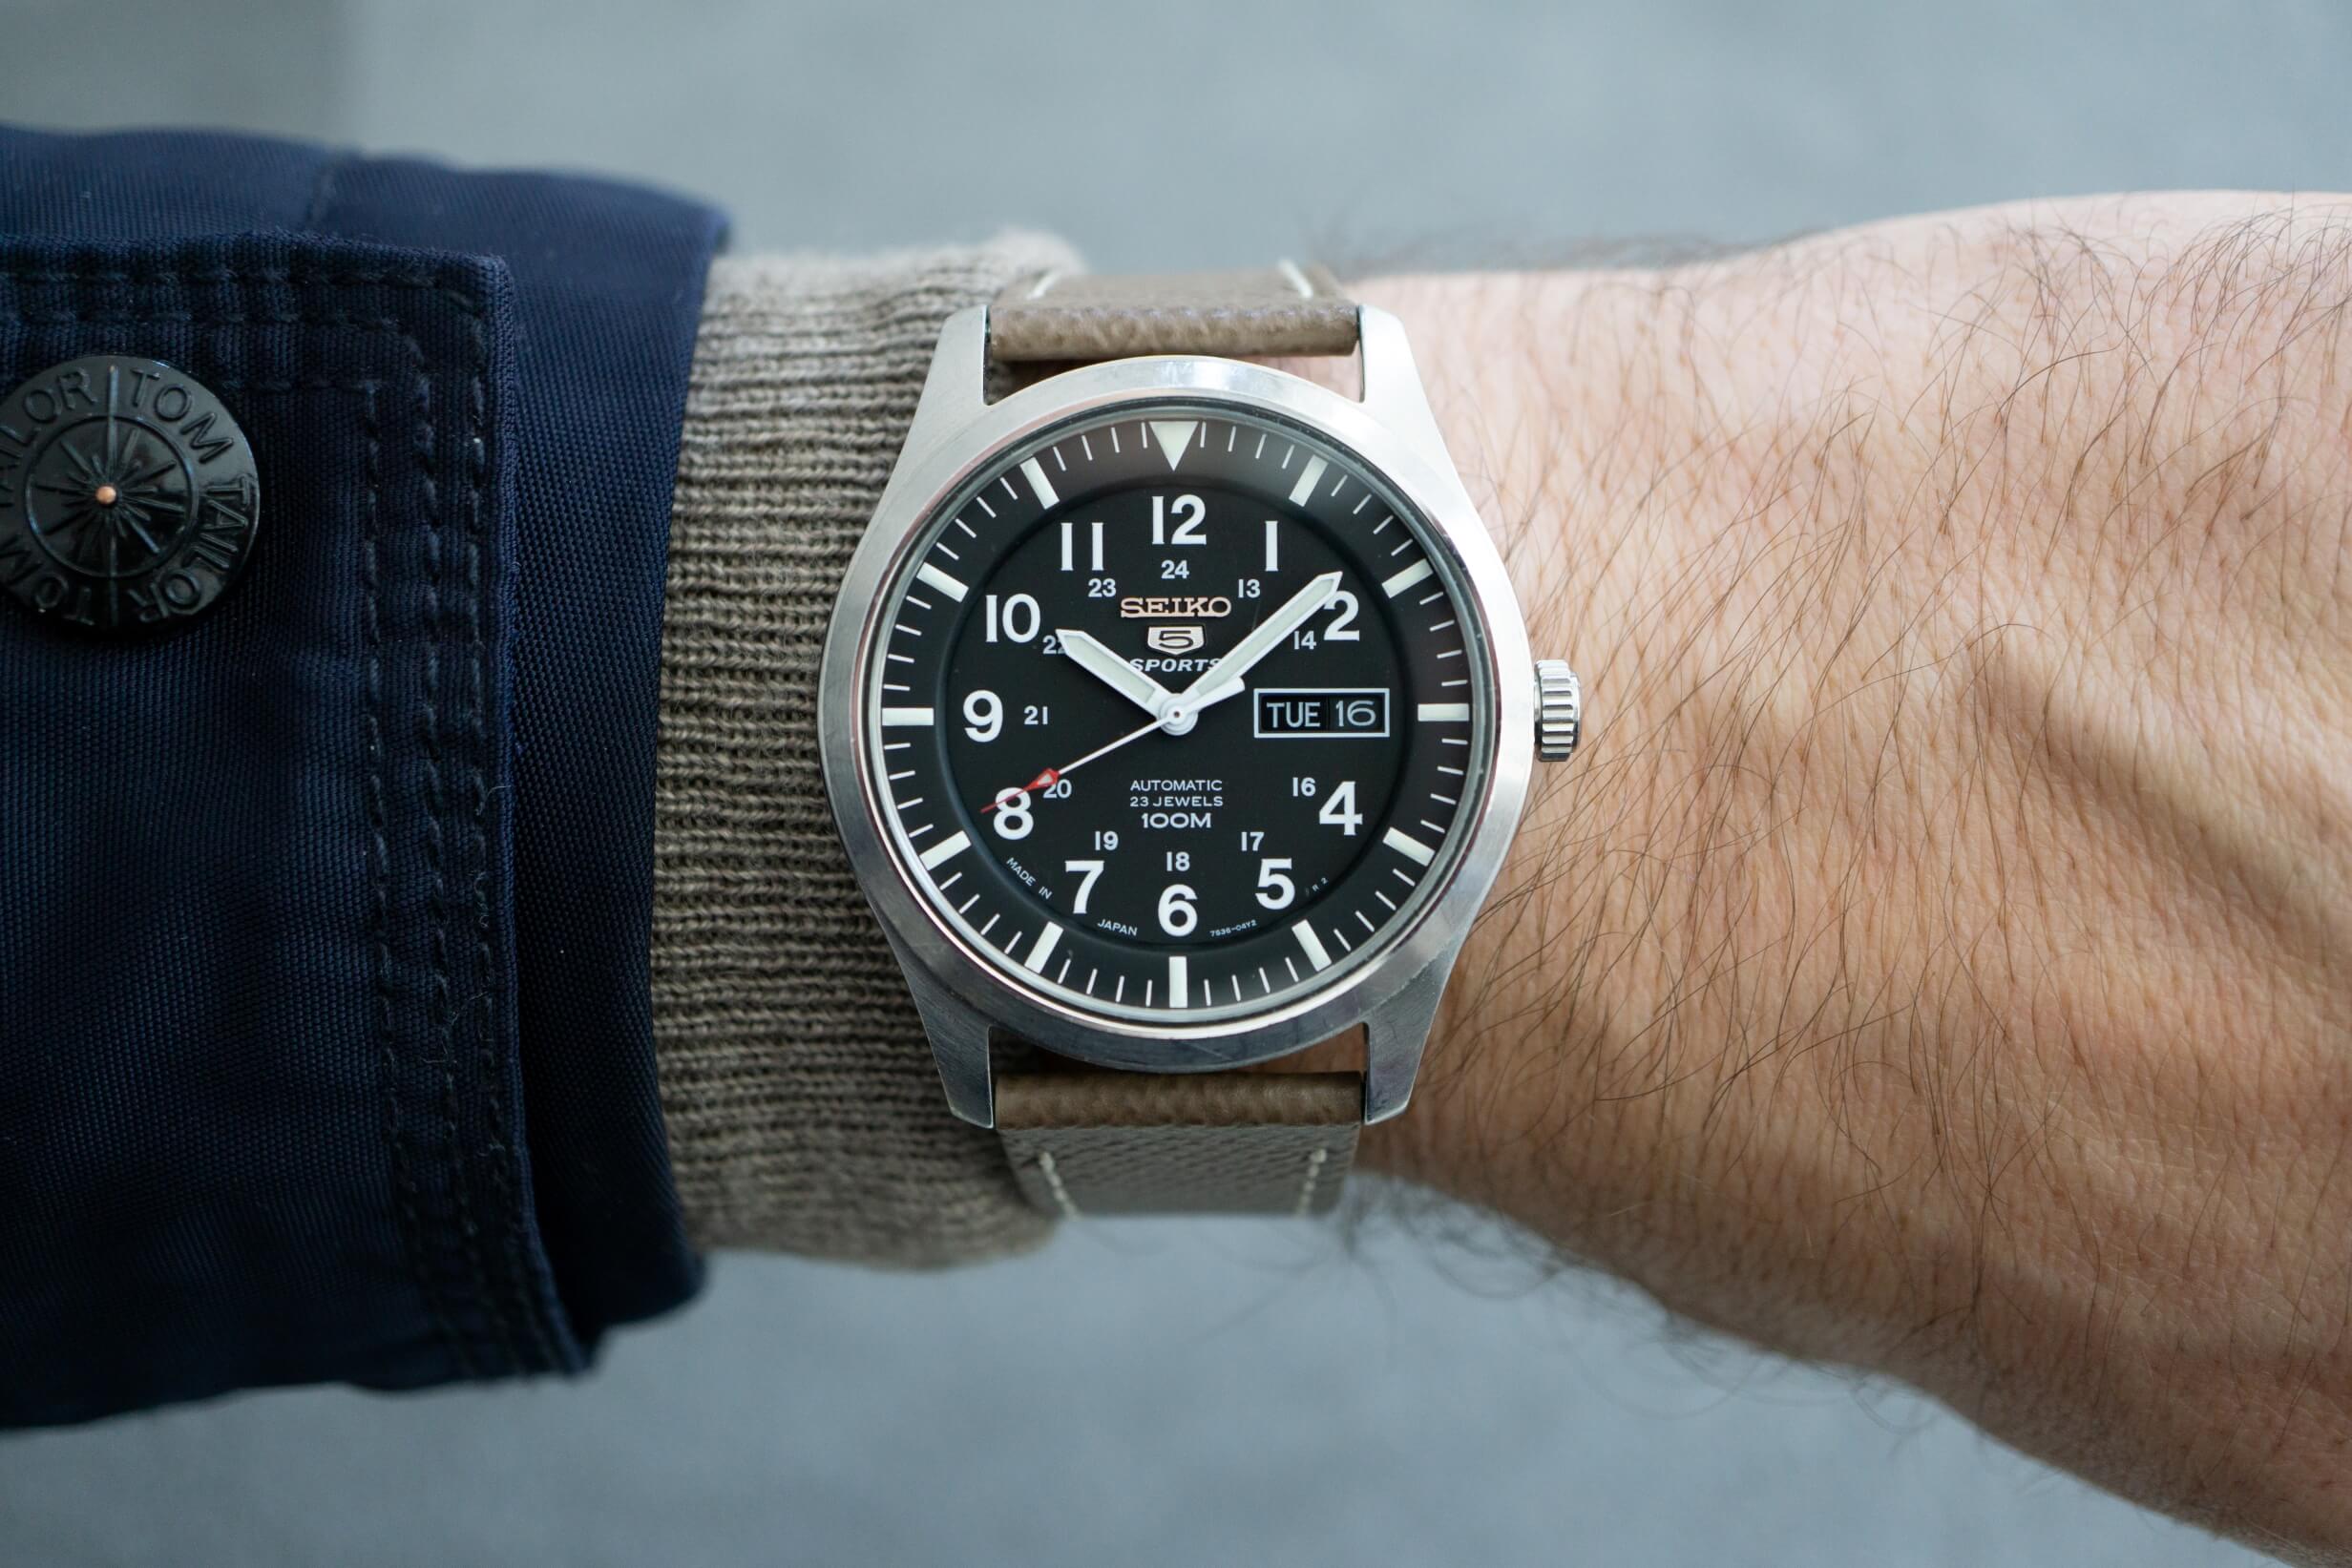 Seiko military watch paired with a leather strap